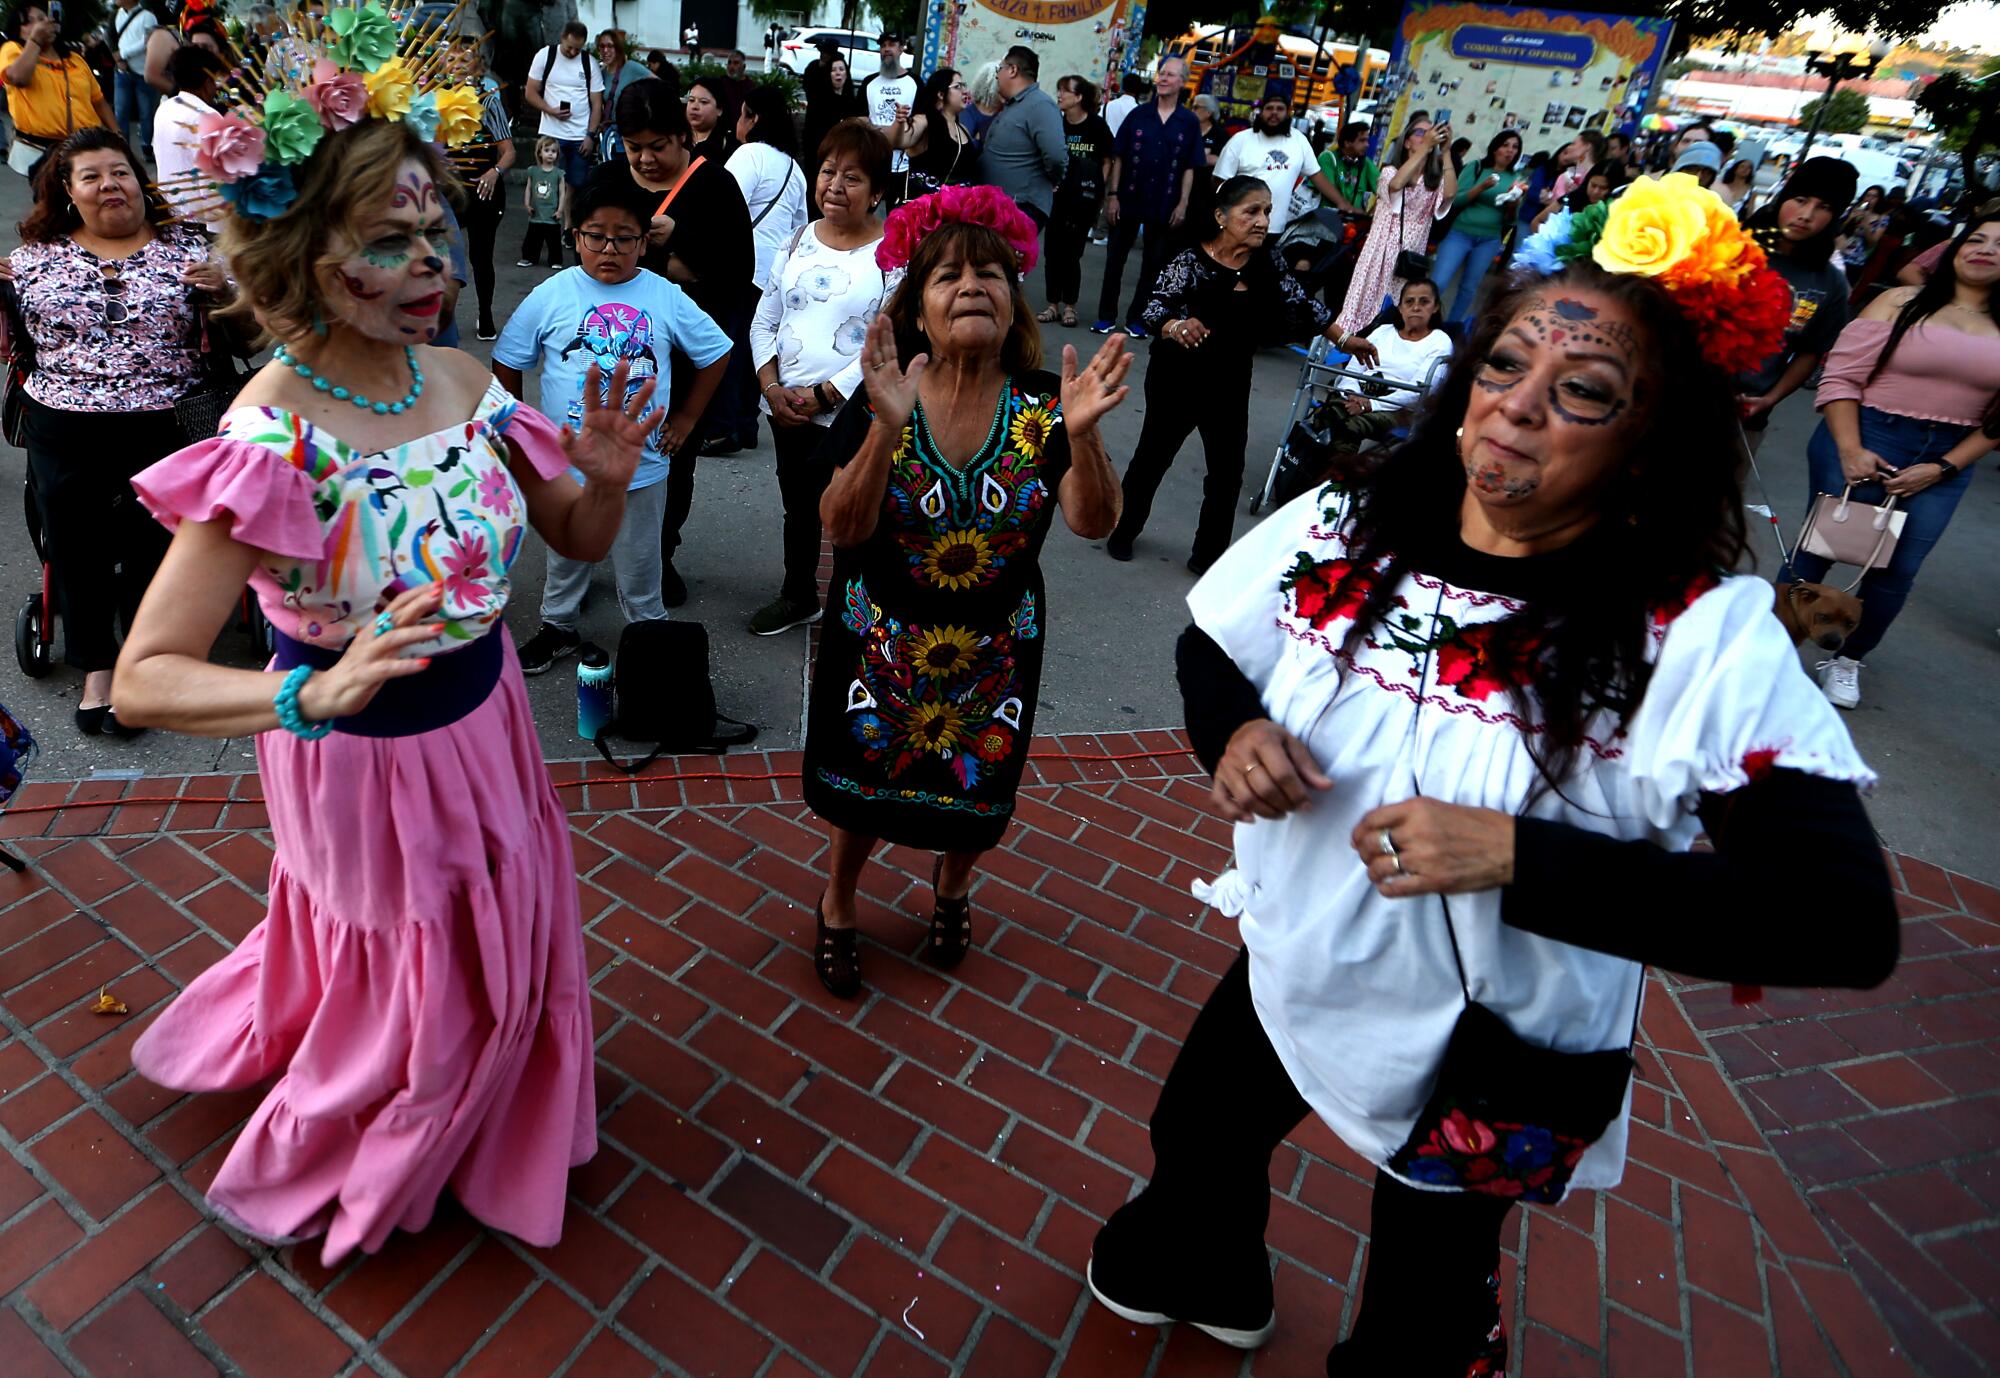 Women in costumes and face paint dance in Olvera Plaza during Day of the Dead festivities.